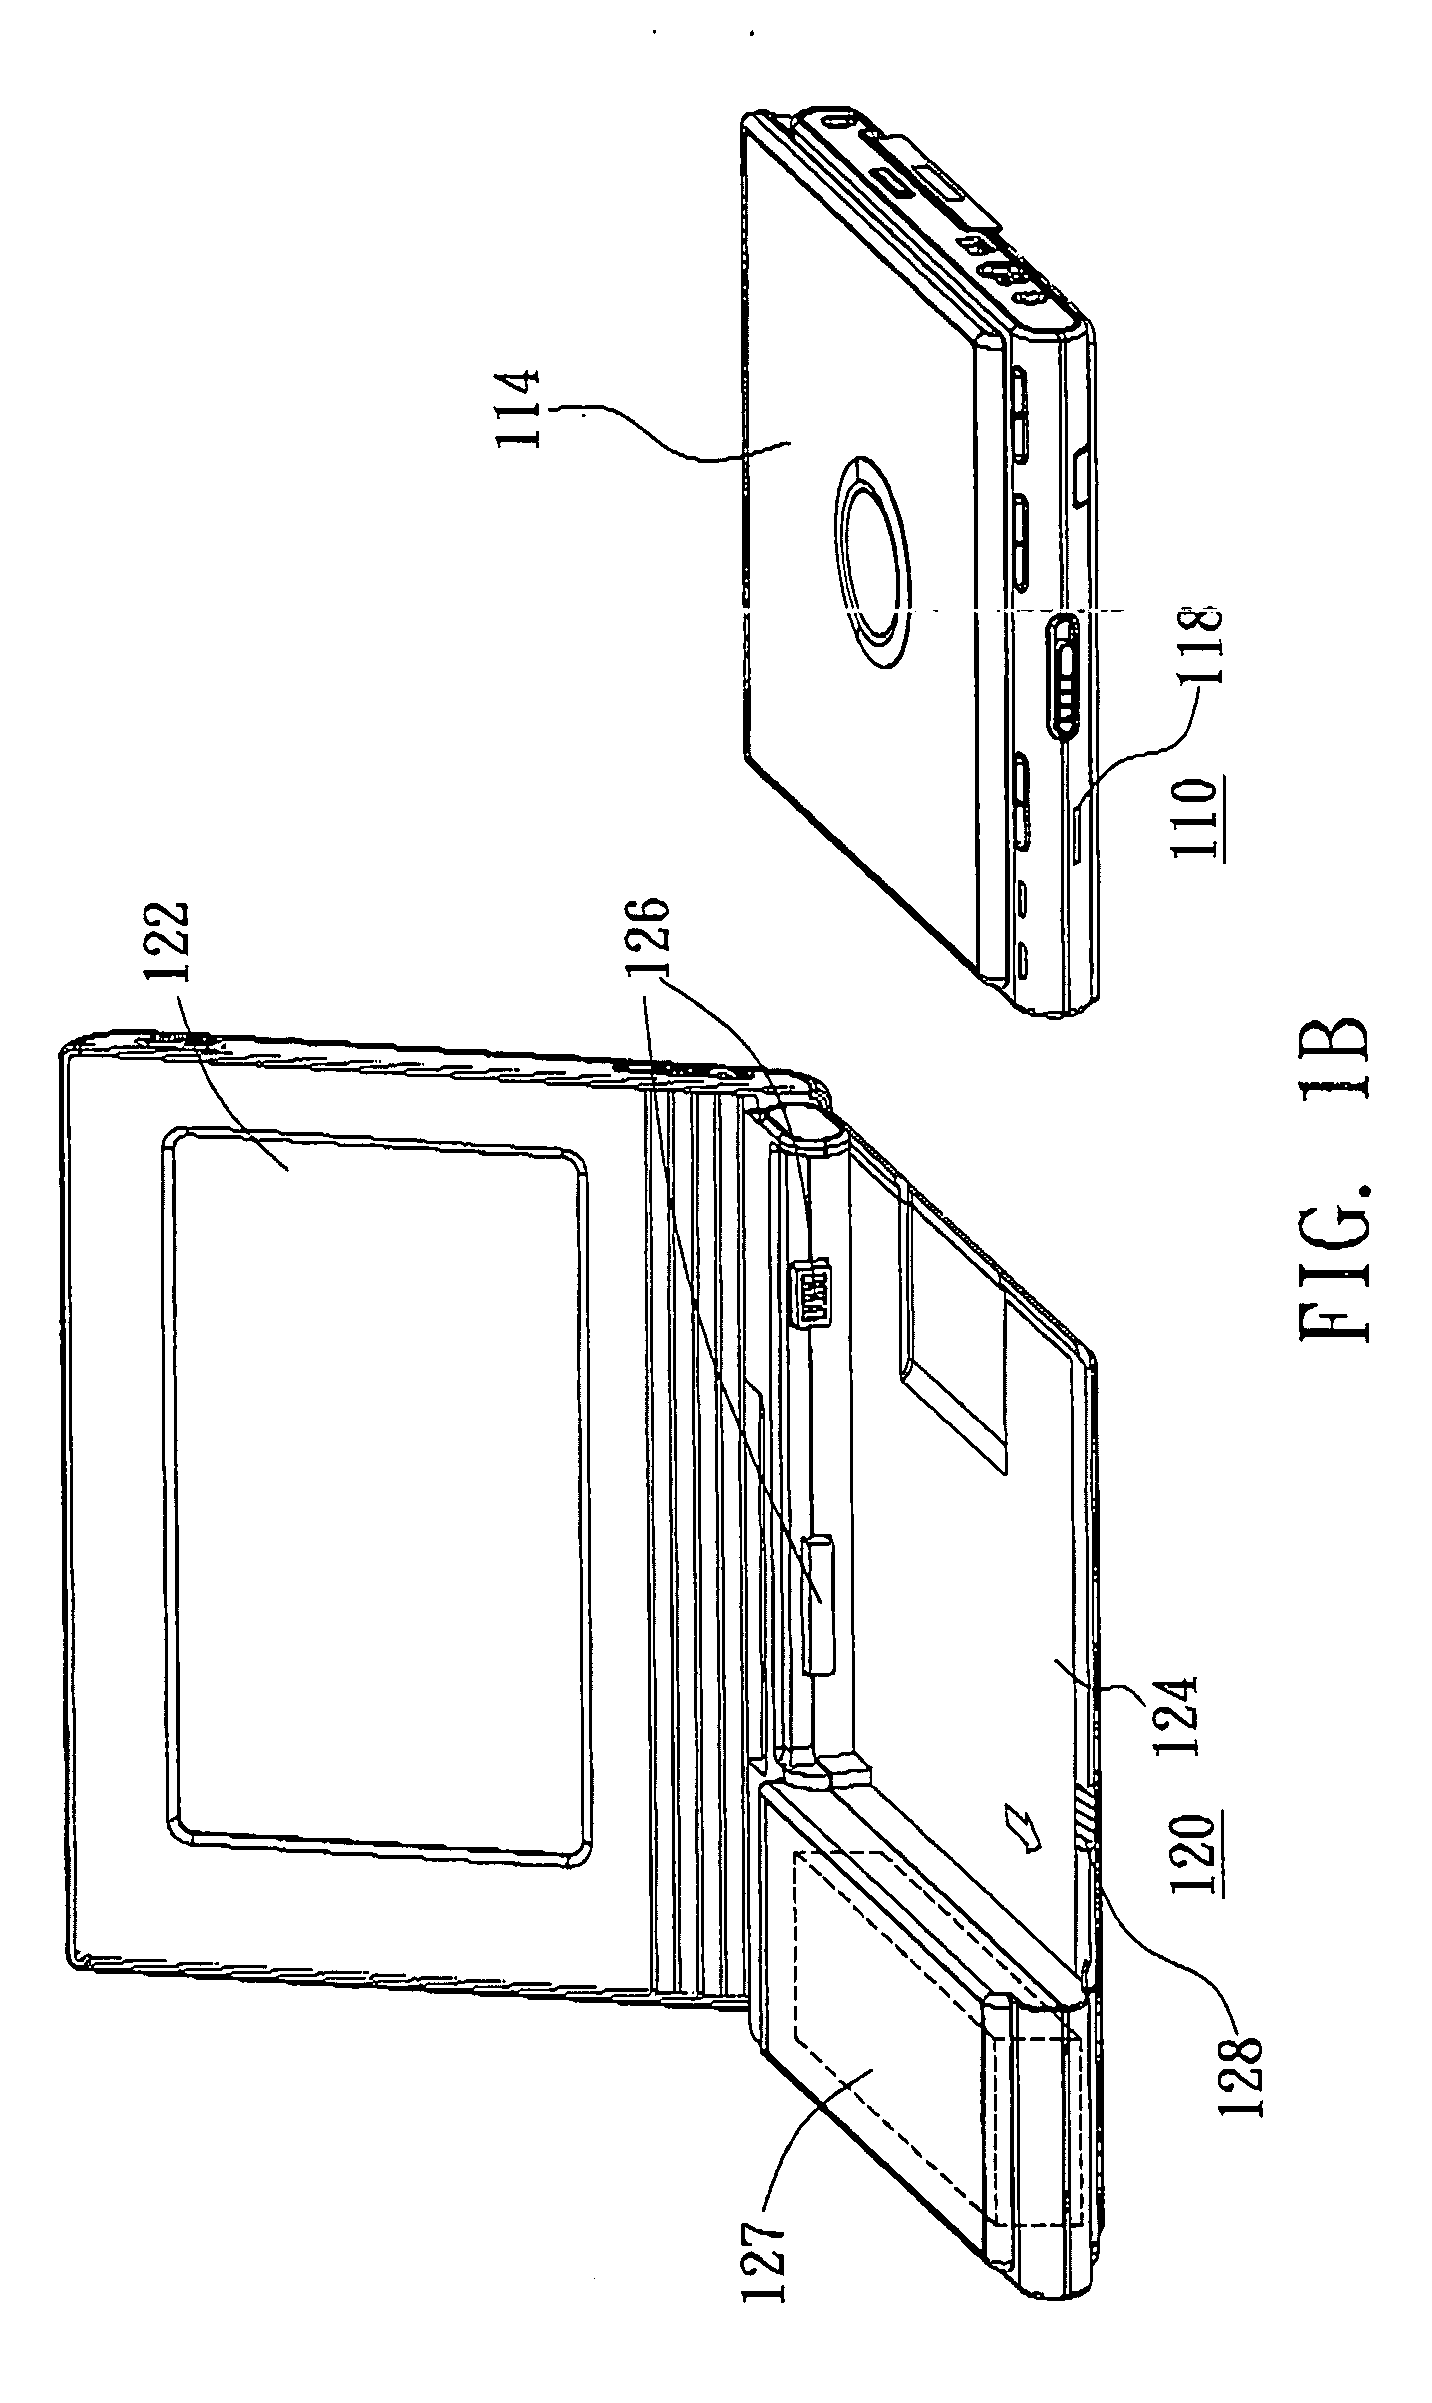 Audio video playing/displaying apparatus with detachable media-accessing device